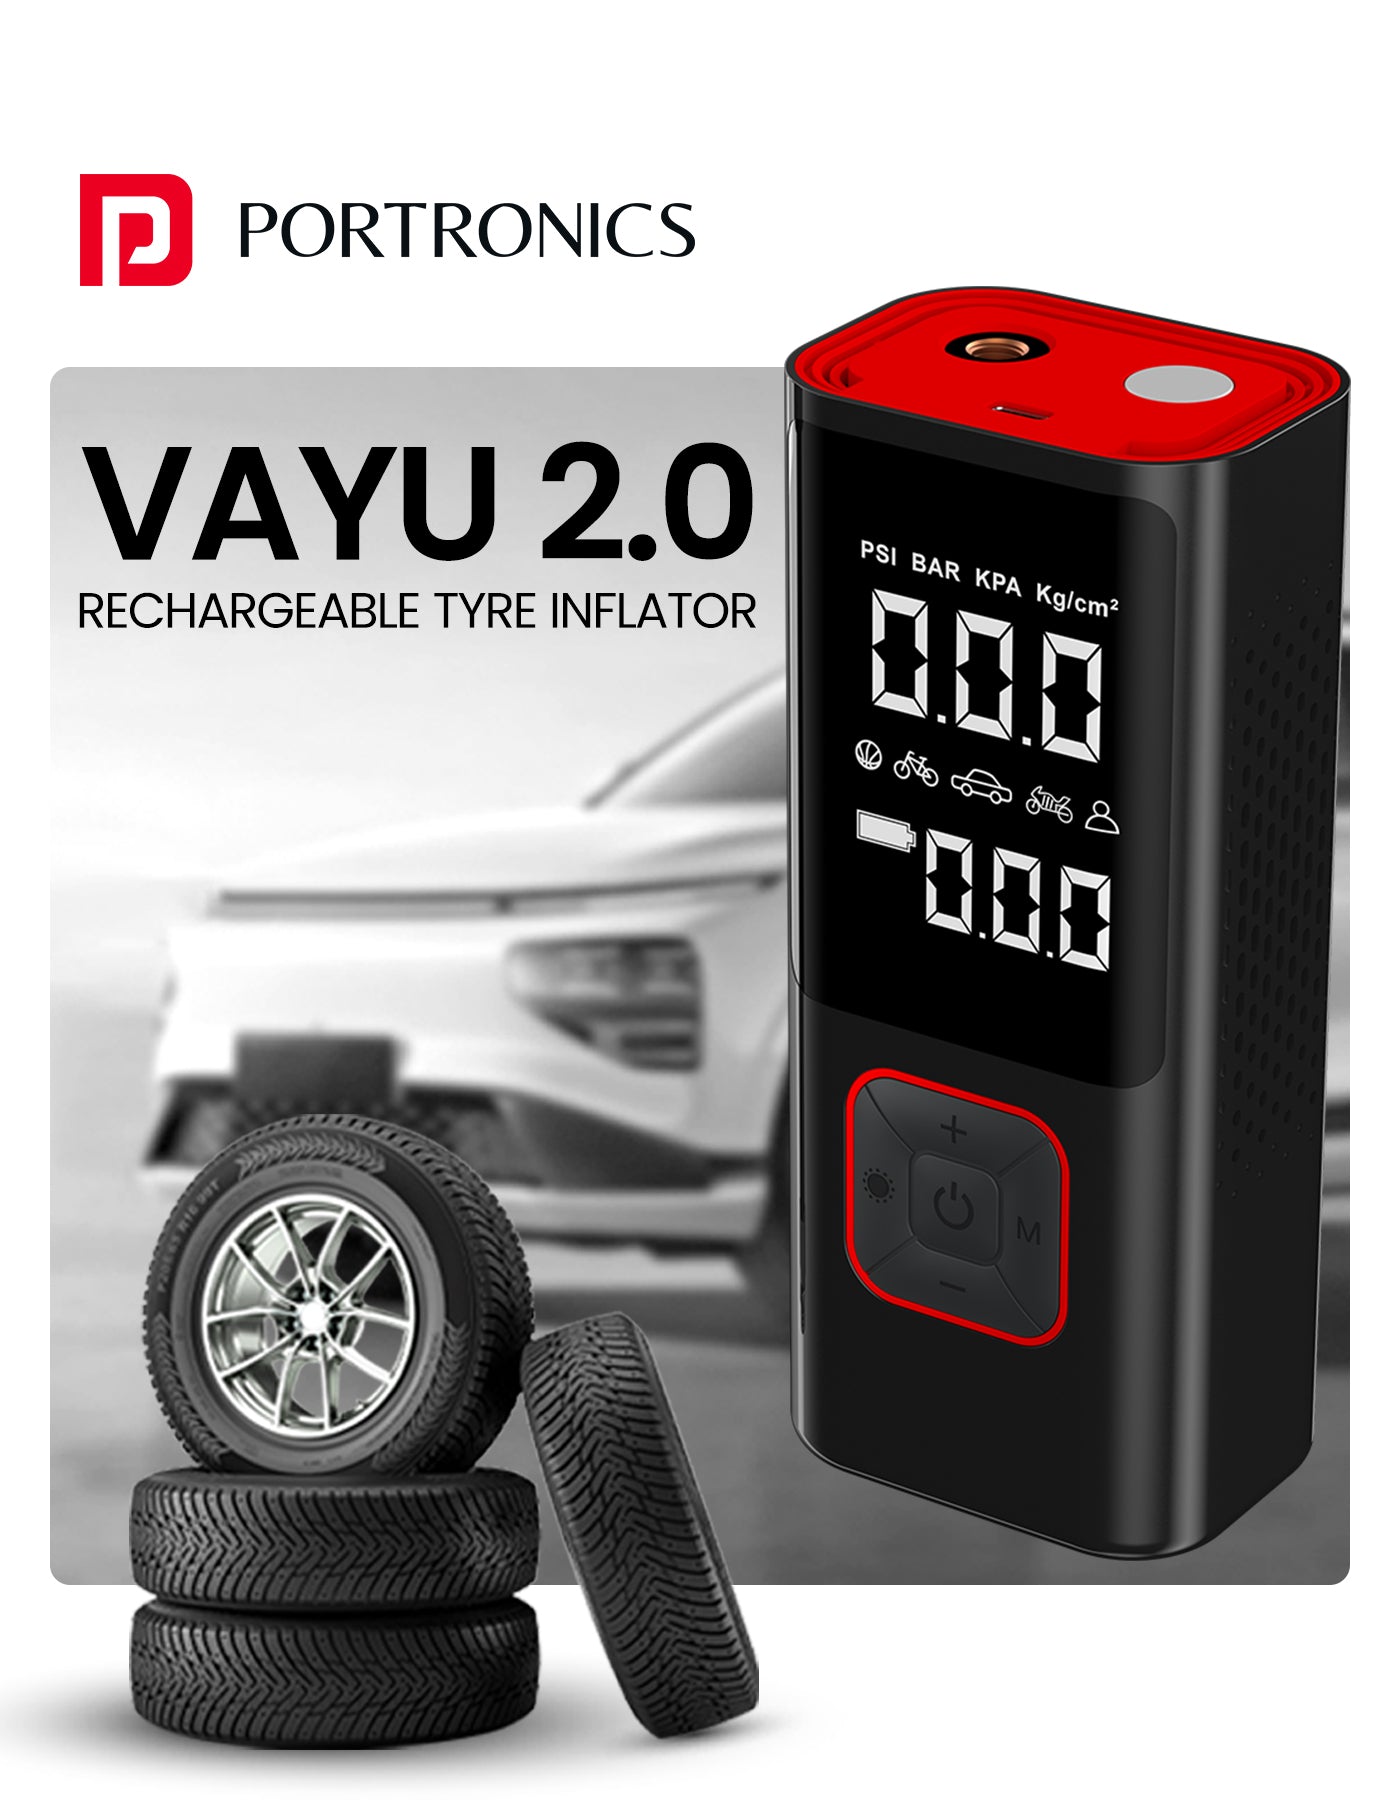 Portronics vayu 2.0 portable tyre inflator| rechargeable car tyre inflator with auto pressure & limit detects